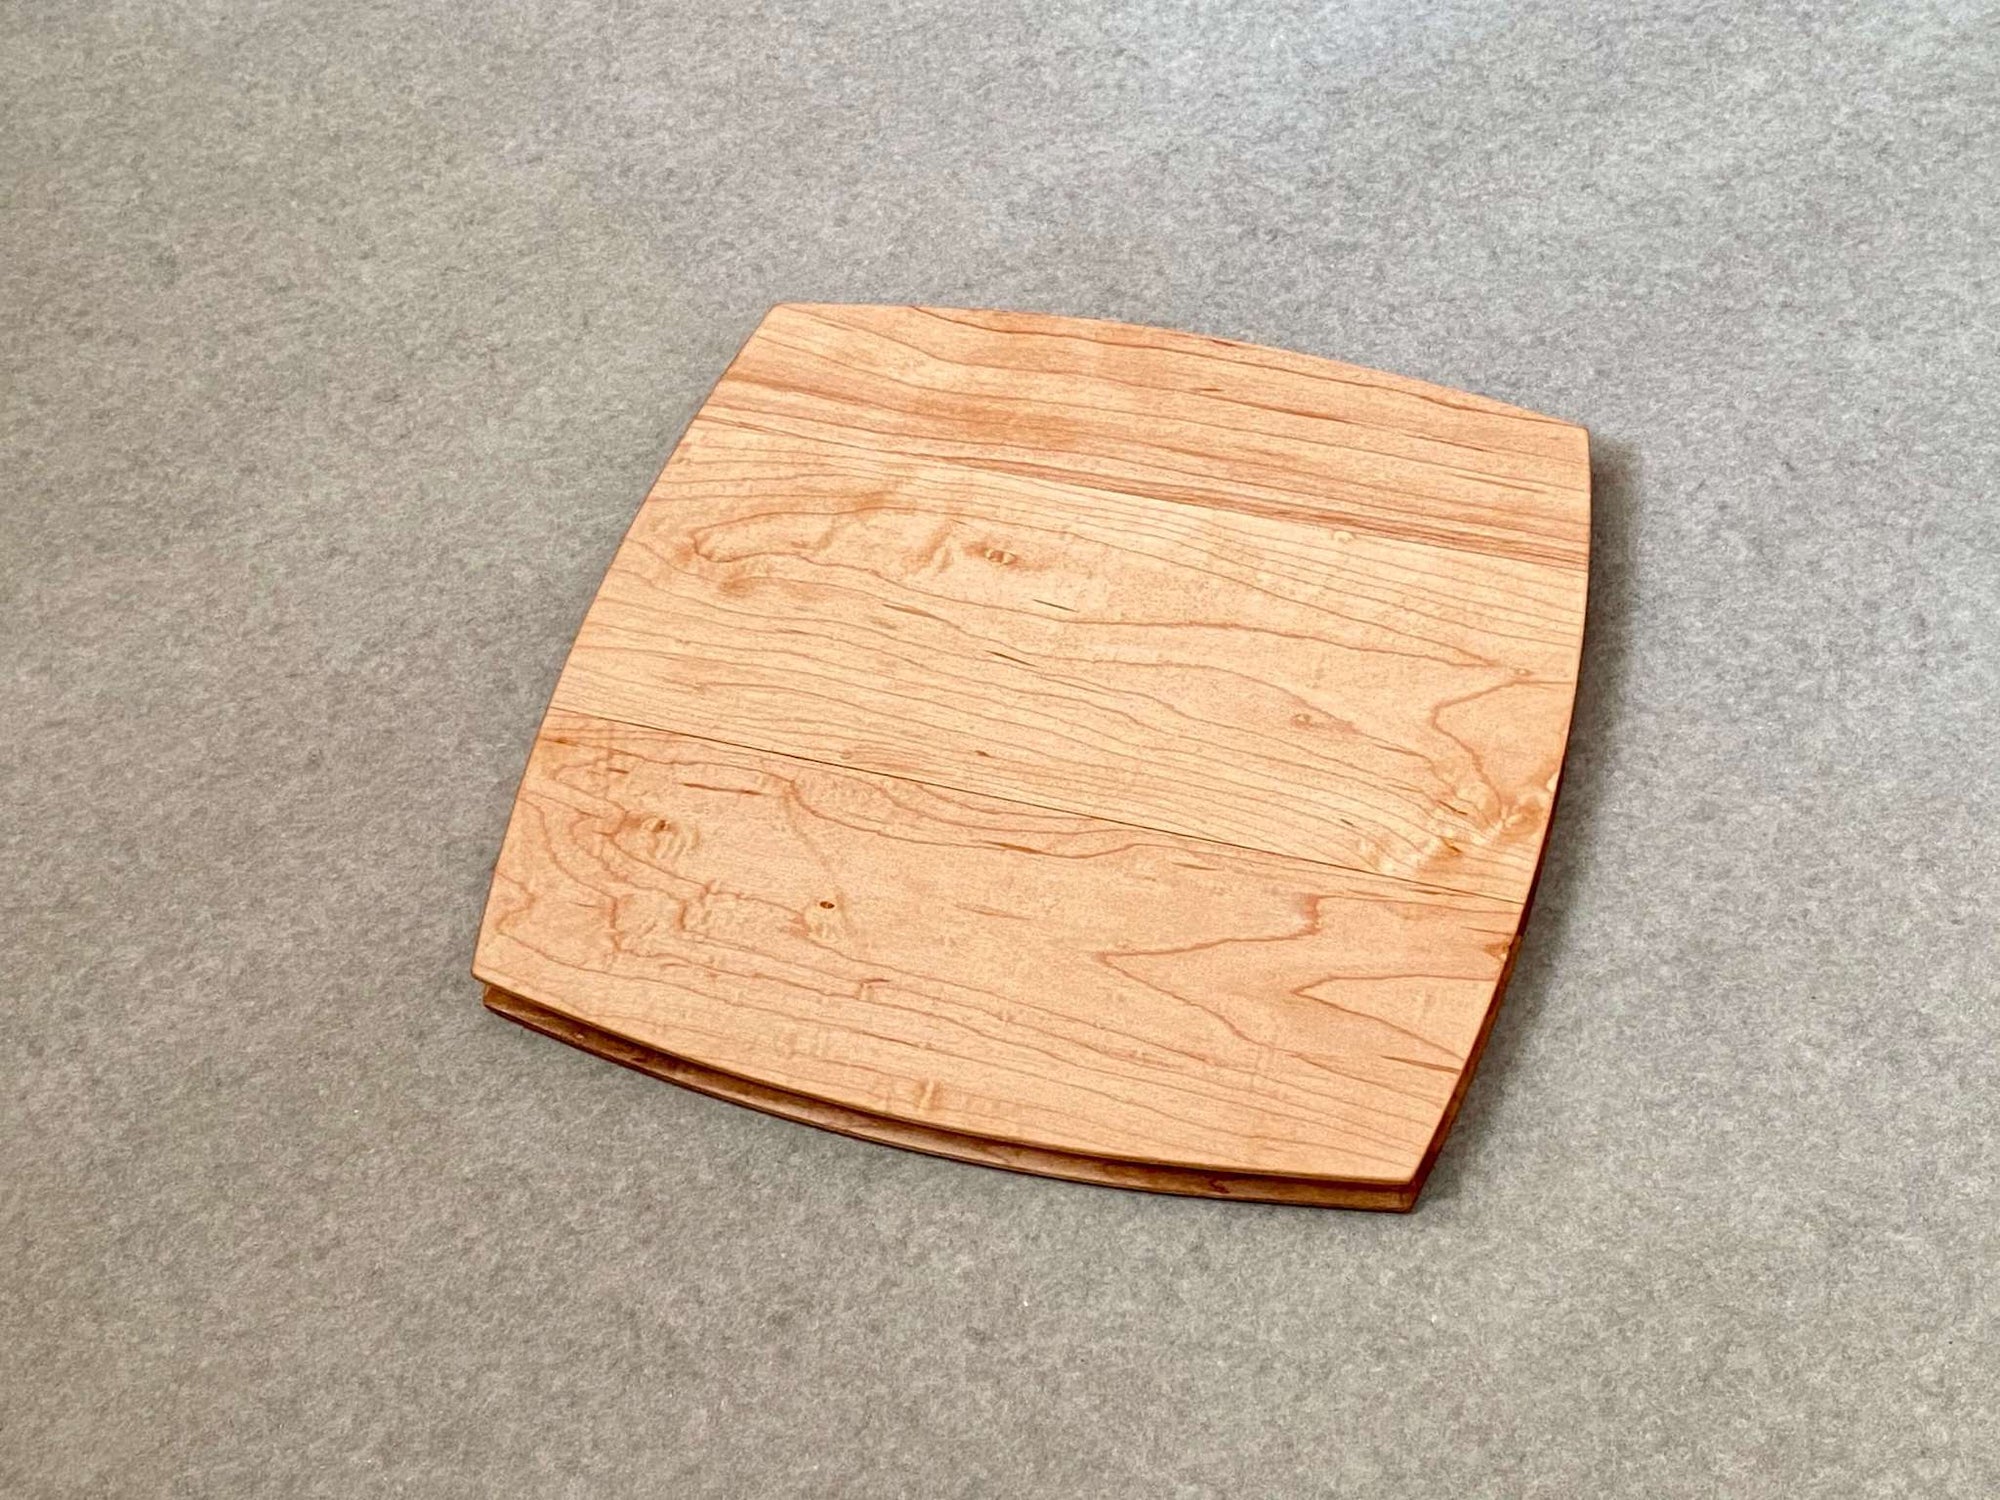 A rounded square cutting and serving board in mahogany. Sculpted edges provide a nice detail.